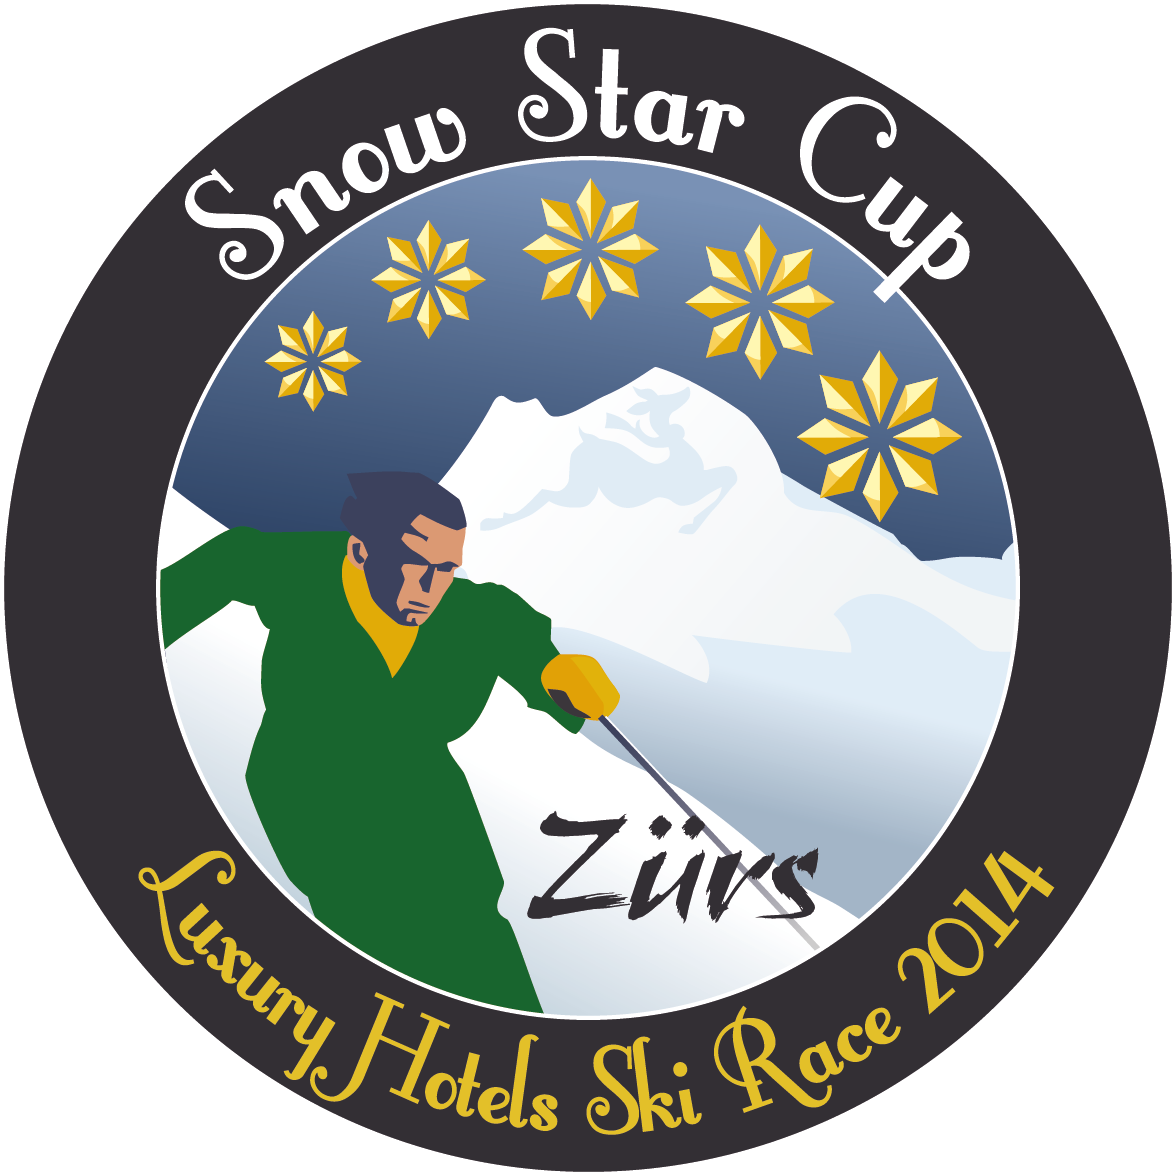 Snow Stars Cup Zürs 2014